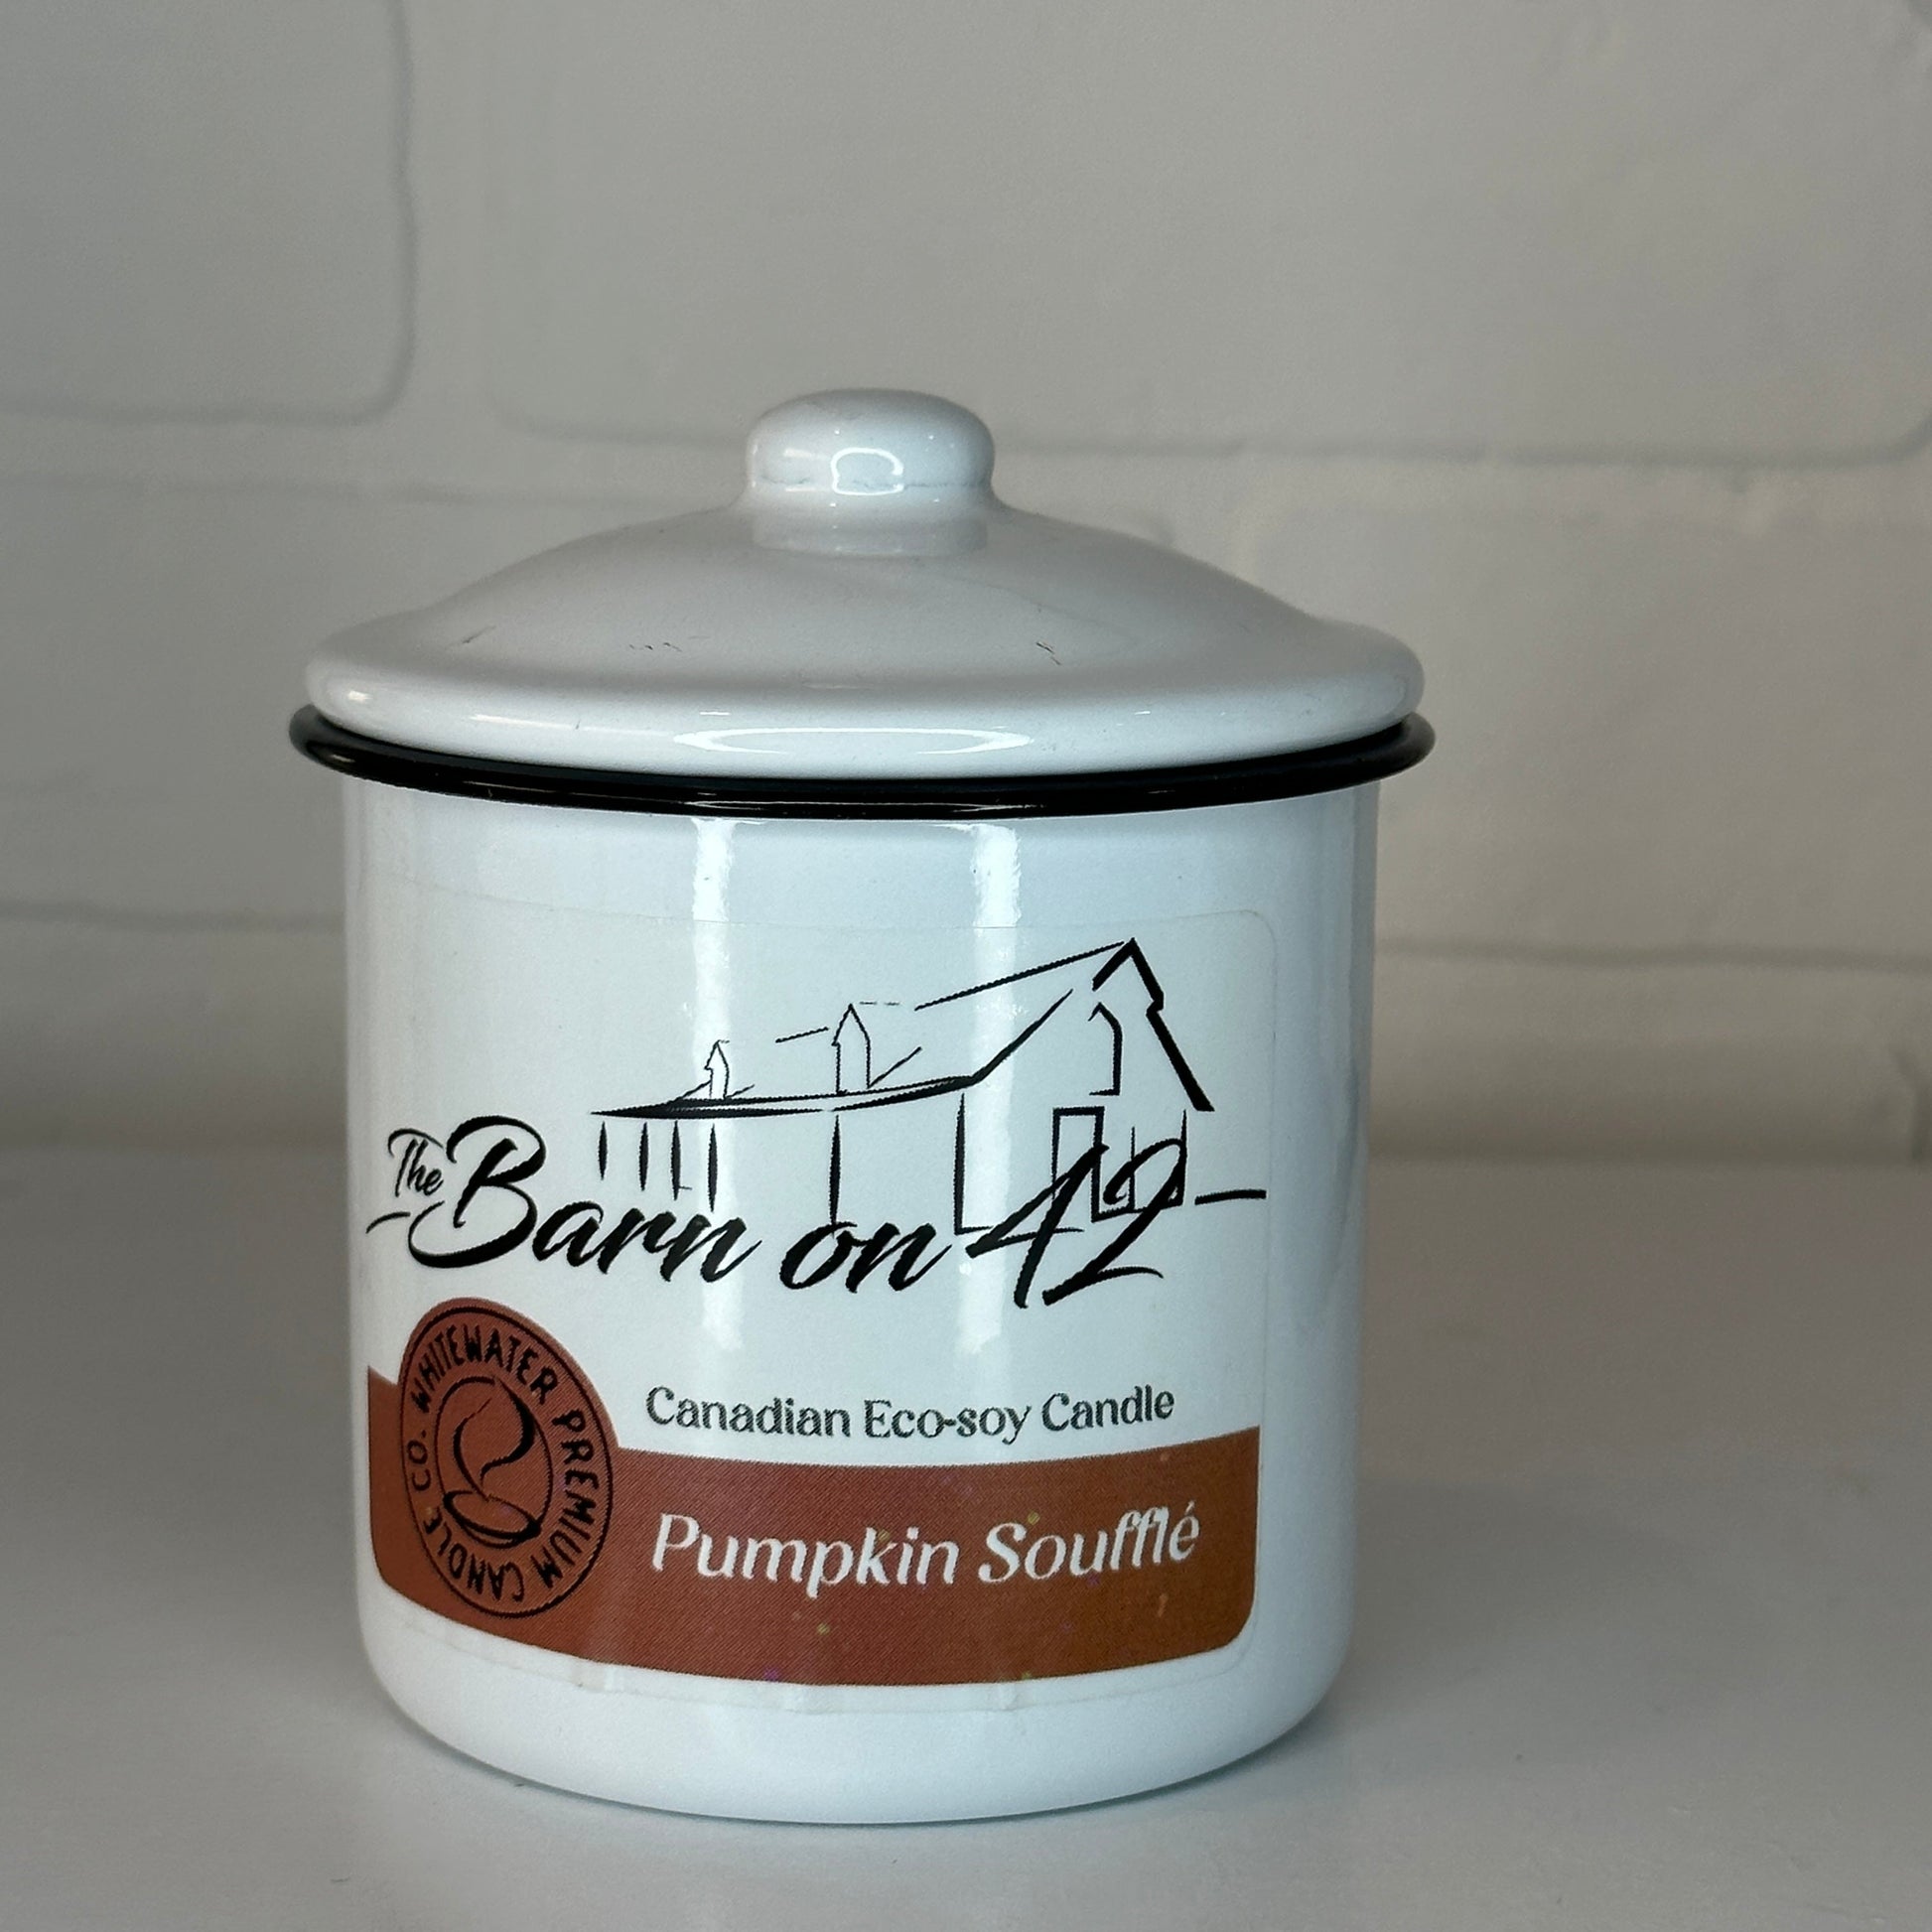 Pumpkin Souffle 9 oz Eco-Soy Candle Whitewater Candles